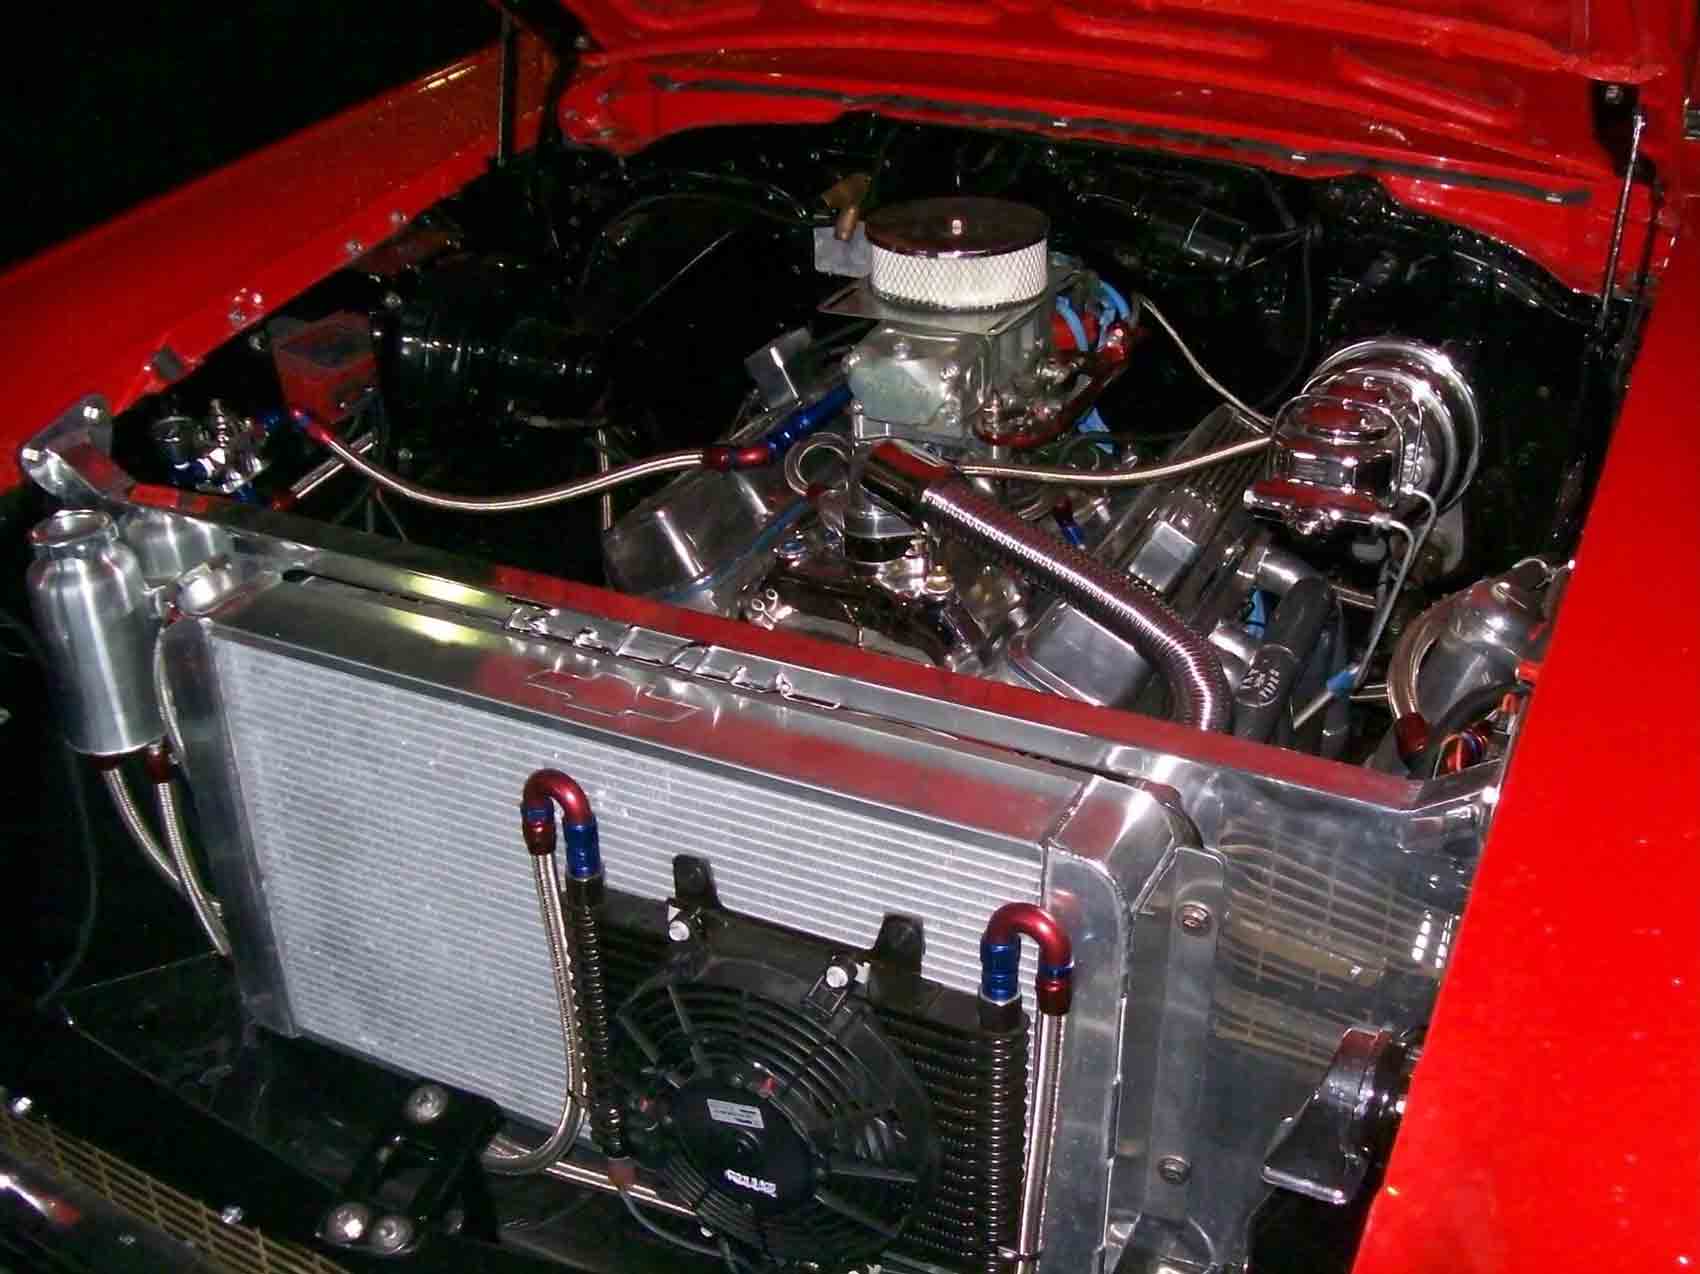 another shot of a red engine